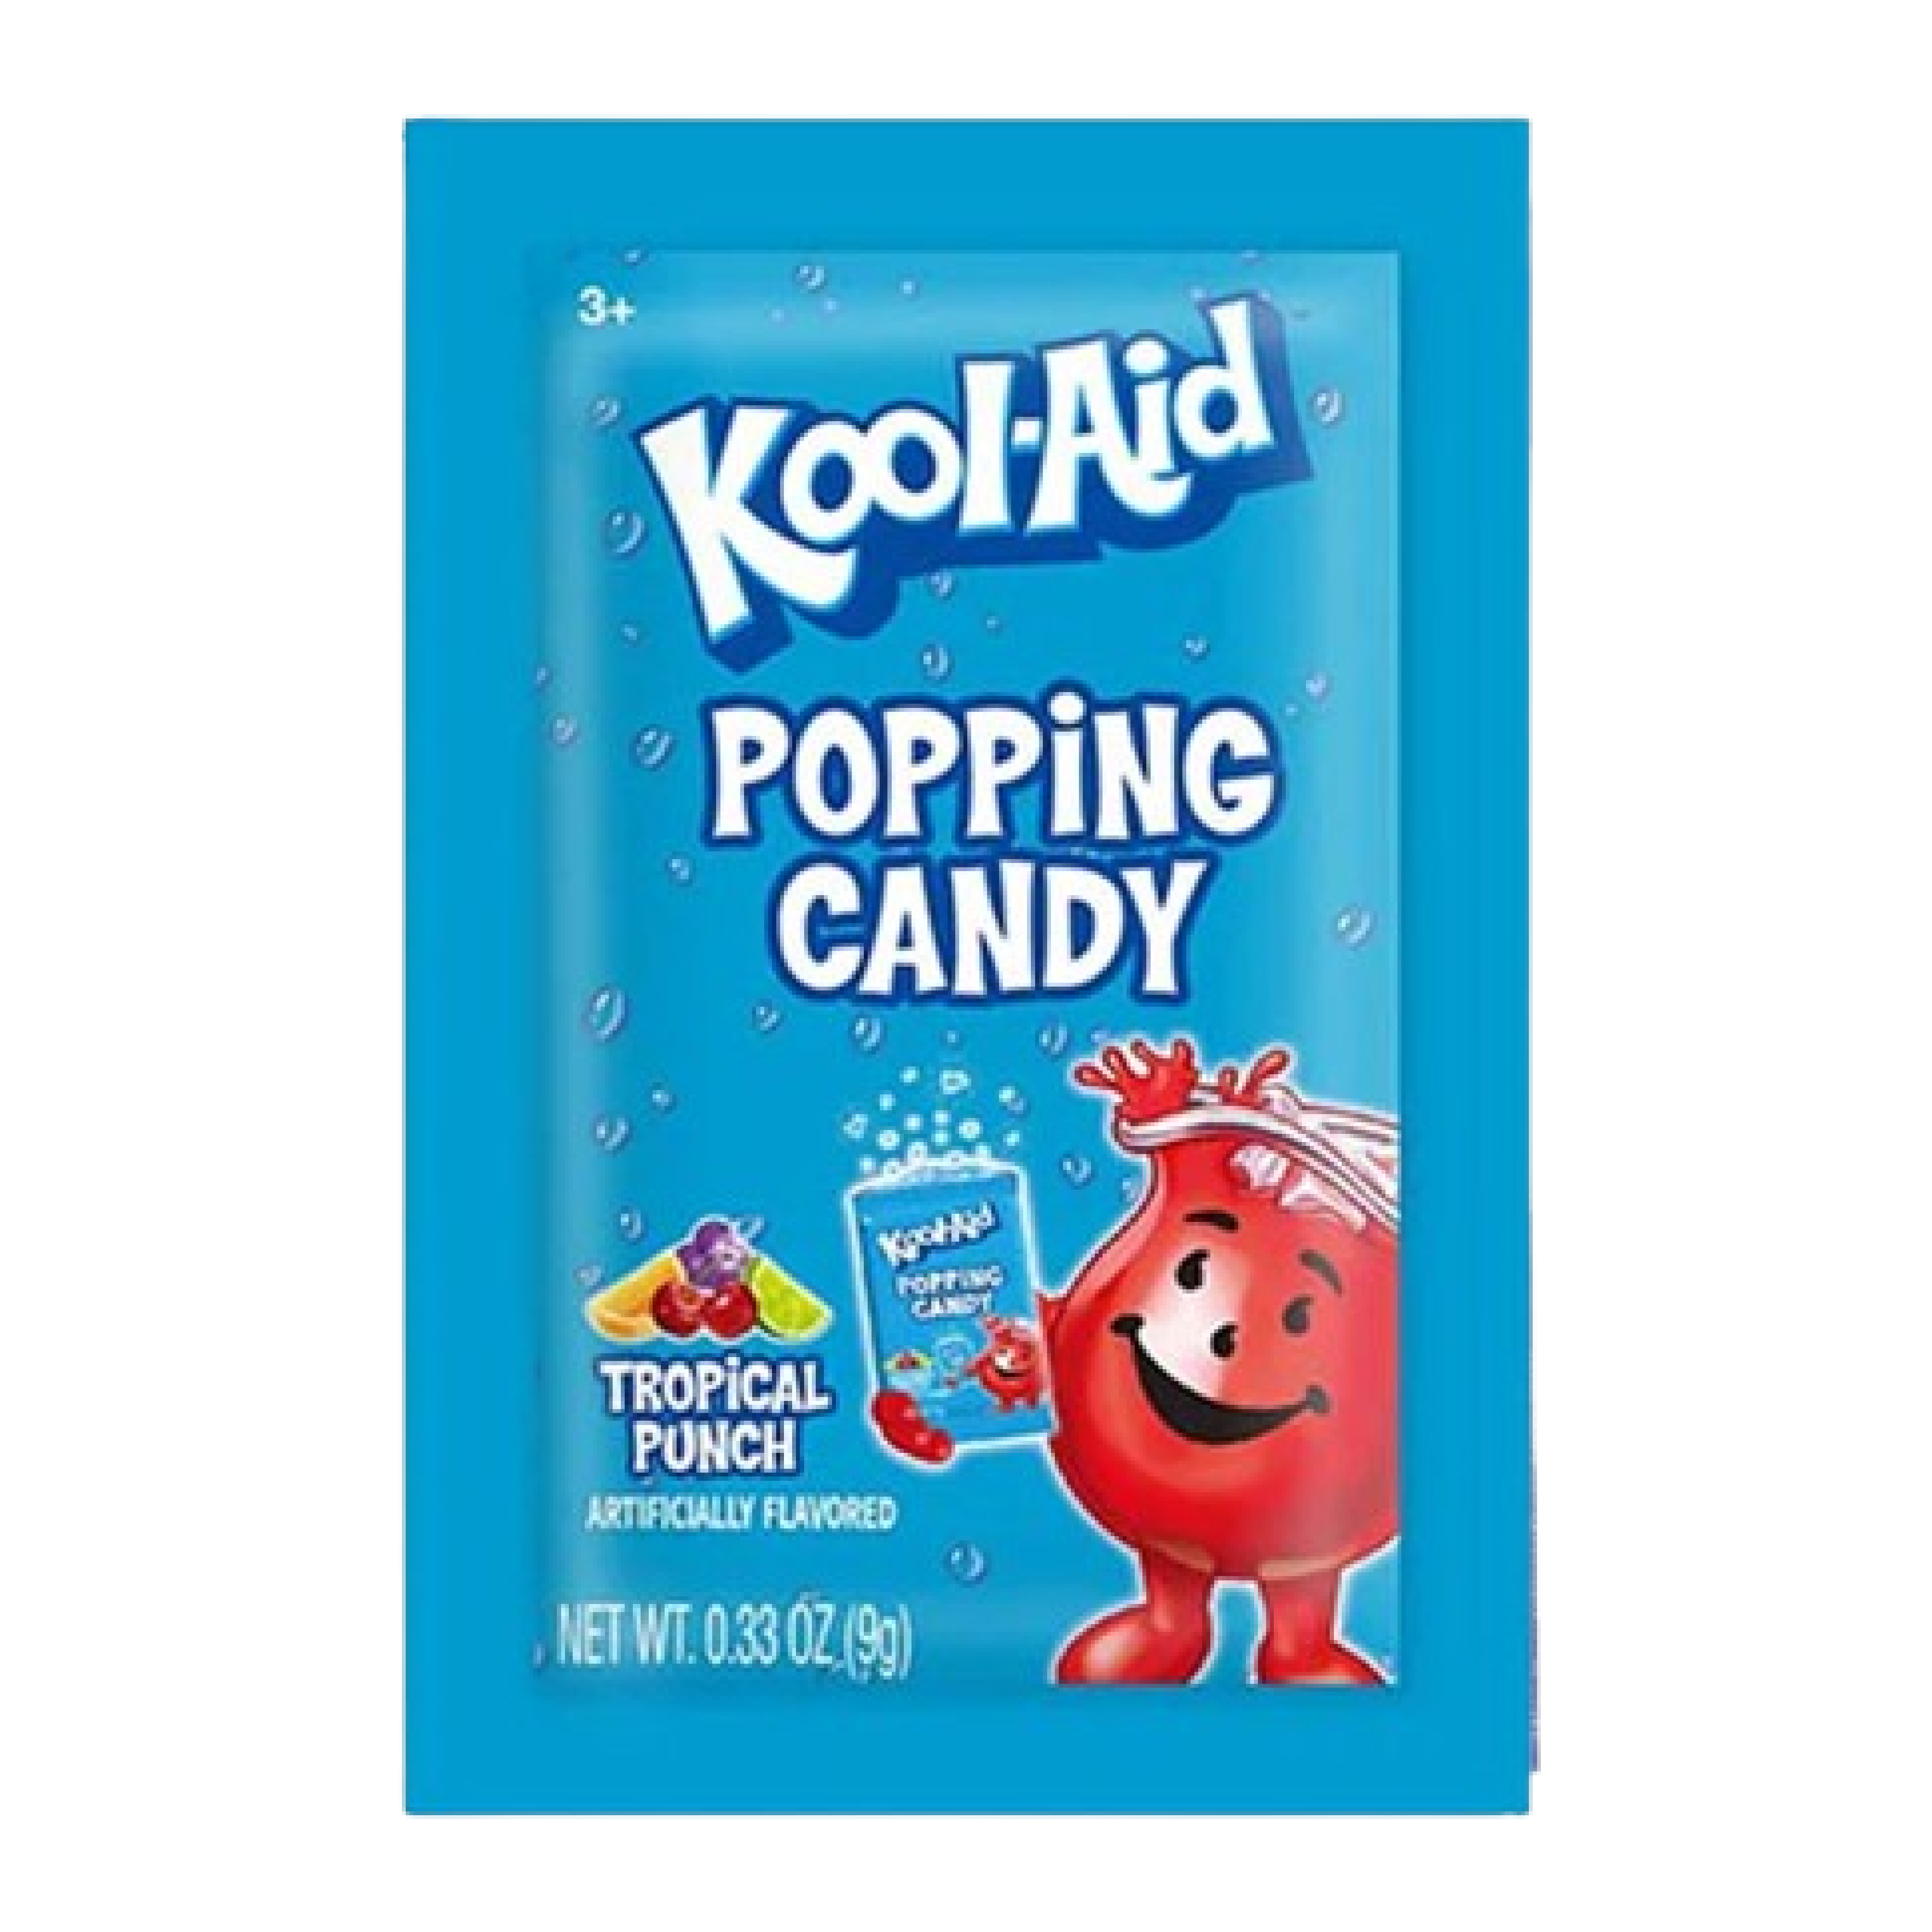 Kool-Aid Tropical Punch Popping Candy .33oz